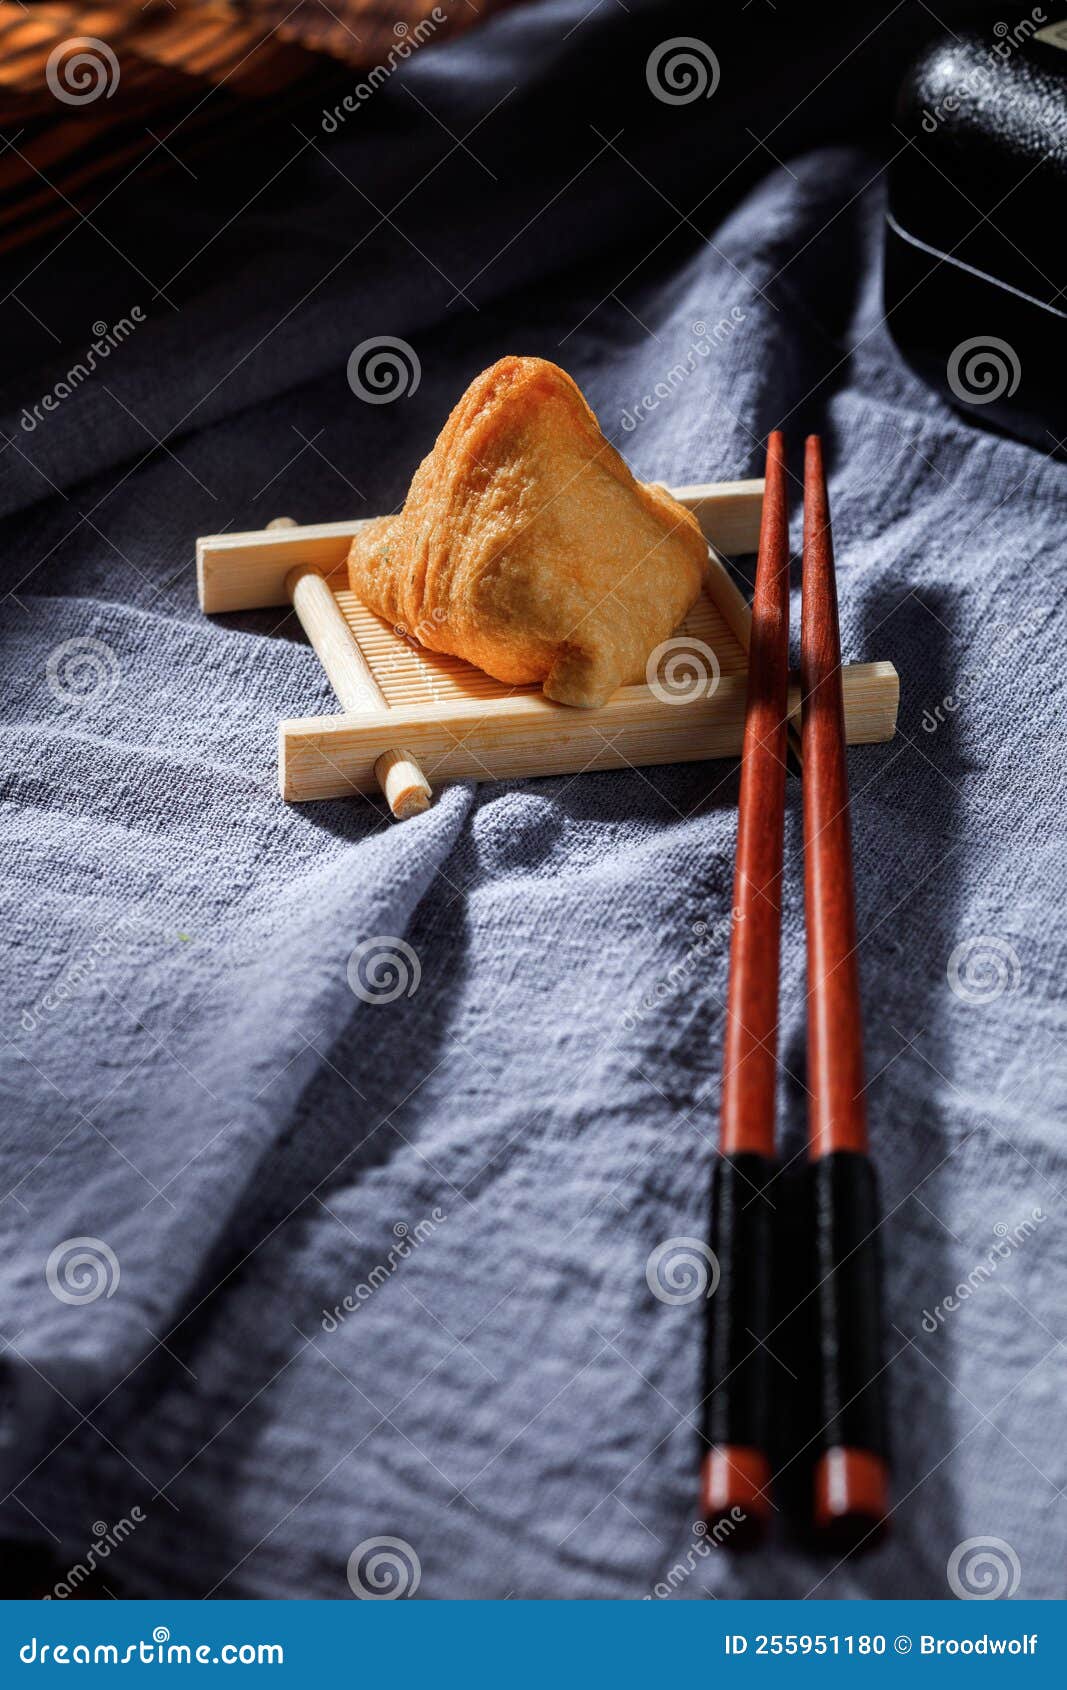 Pictures of Japanese Traditional Food Sushi Stock Photo - Image of ...